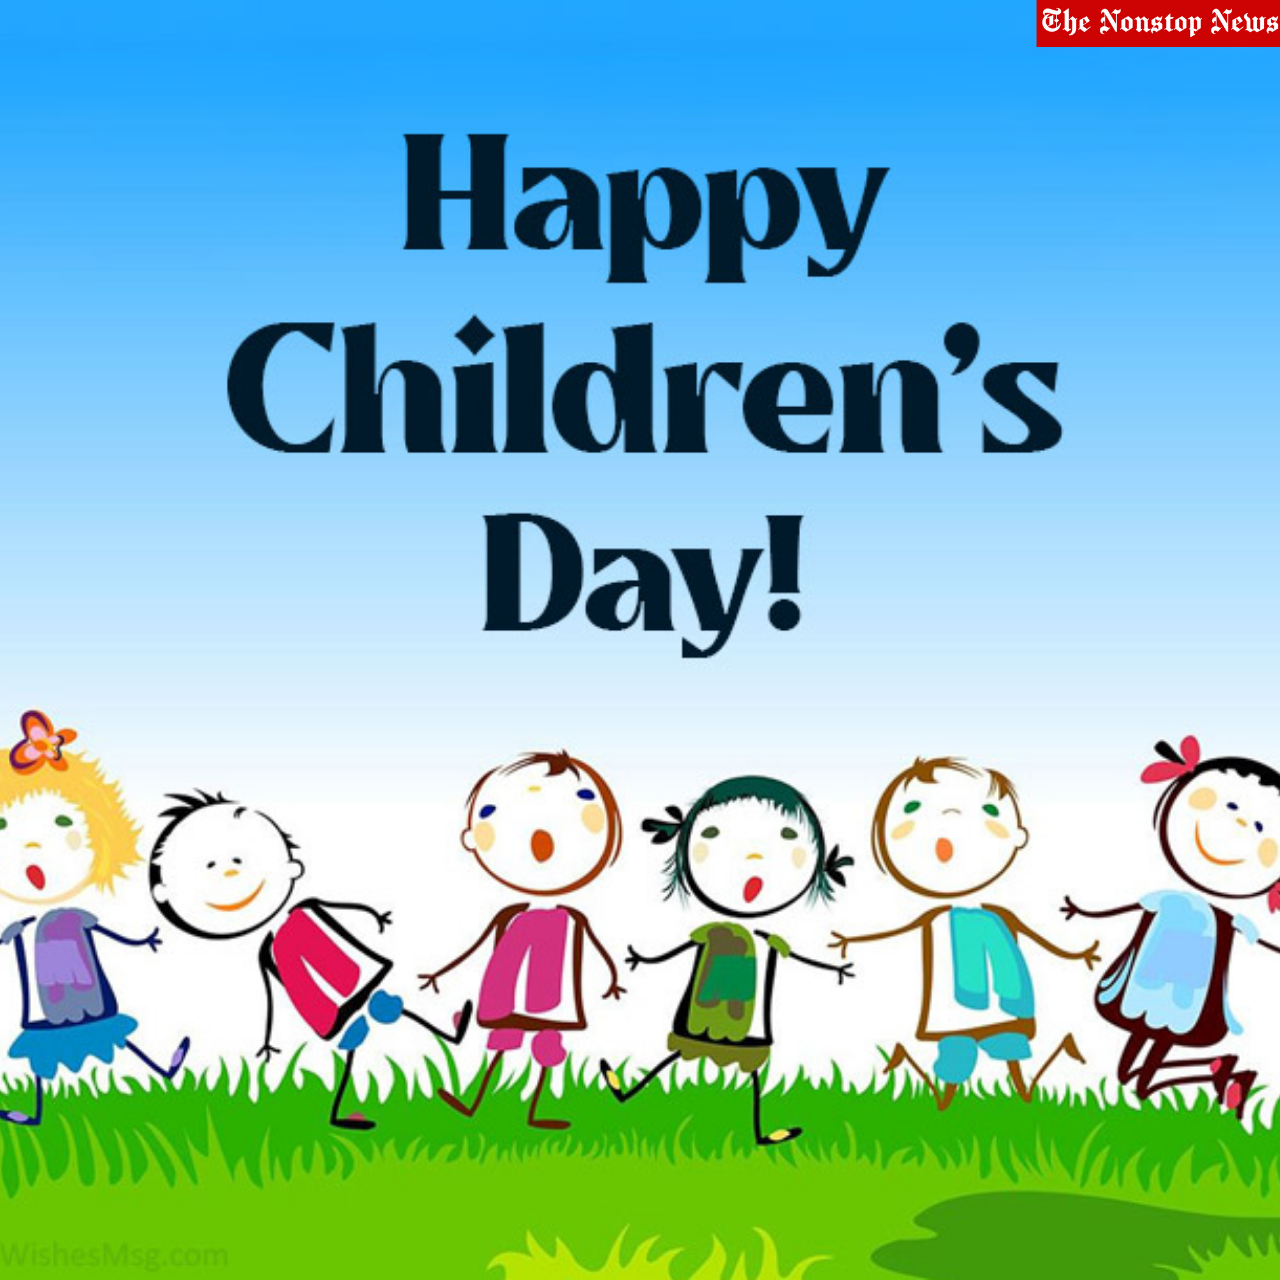 Happy Children's Day 2021 Quotes, HD Images, Greetings, Wishes, and Messages from Parents